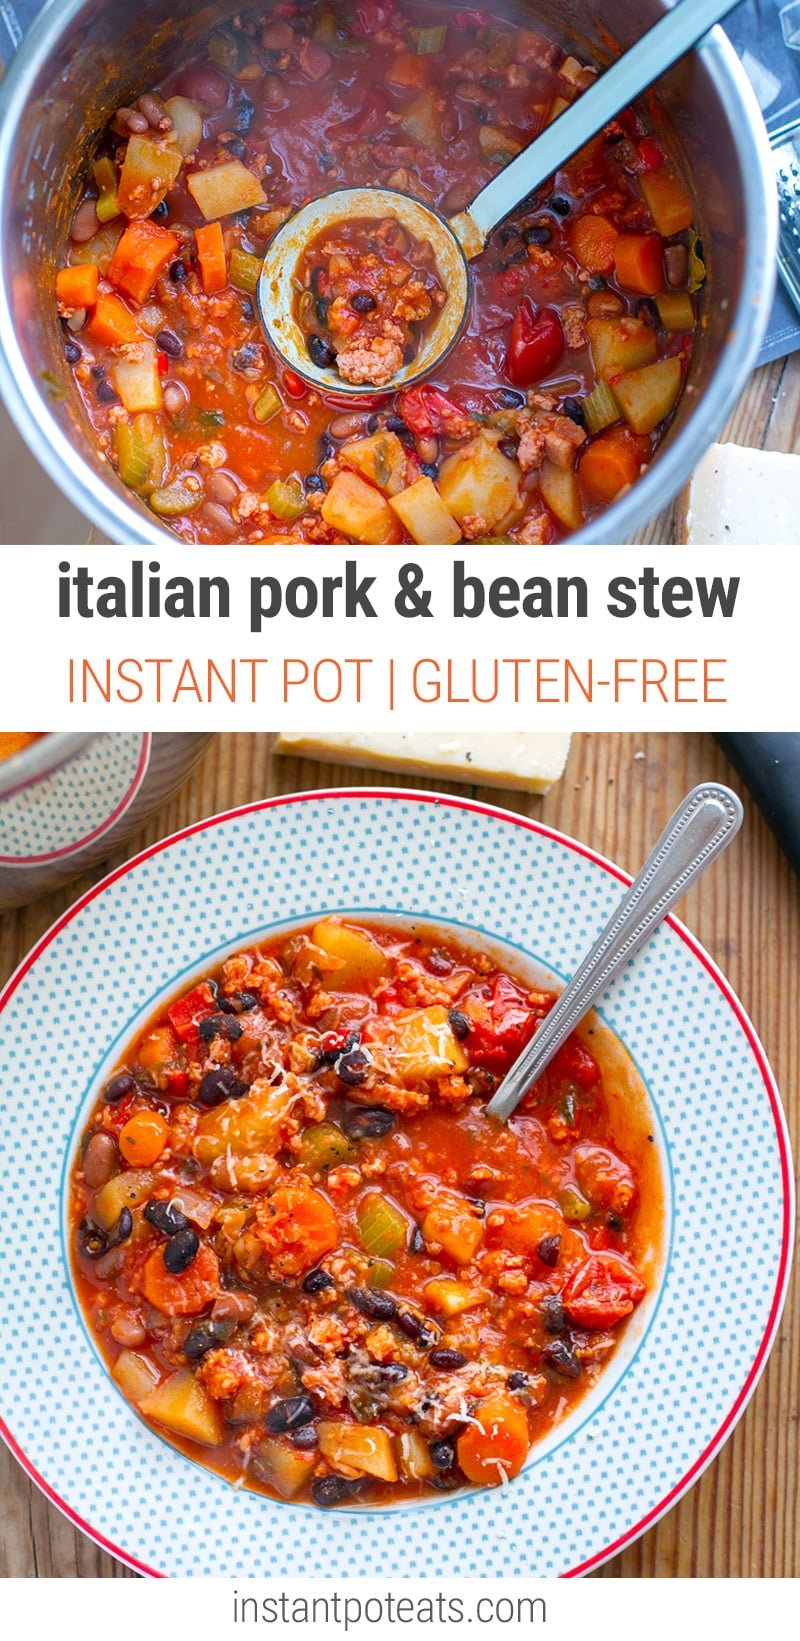 Instant Pot pork stew with beans and tomatoes